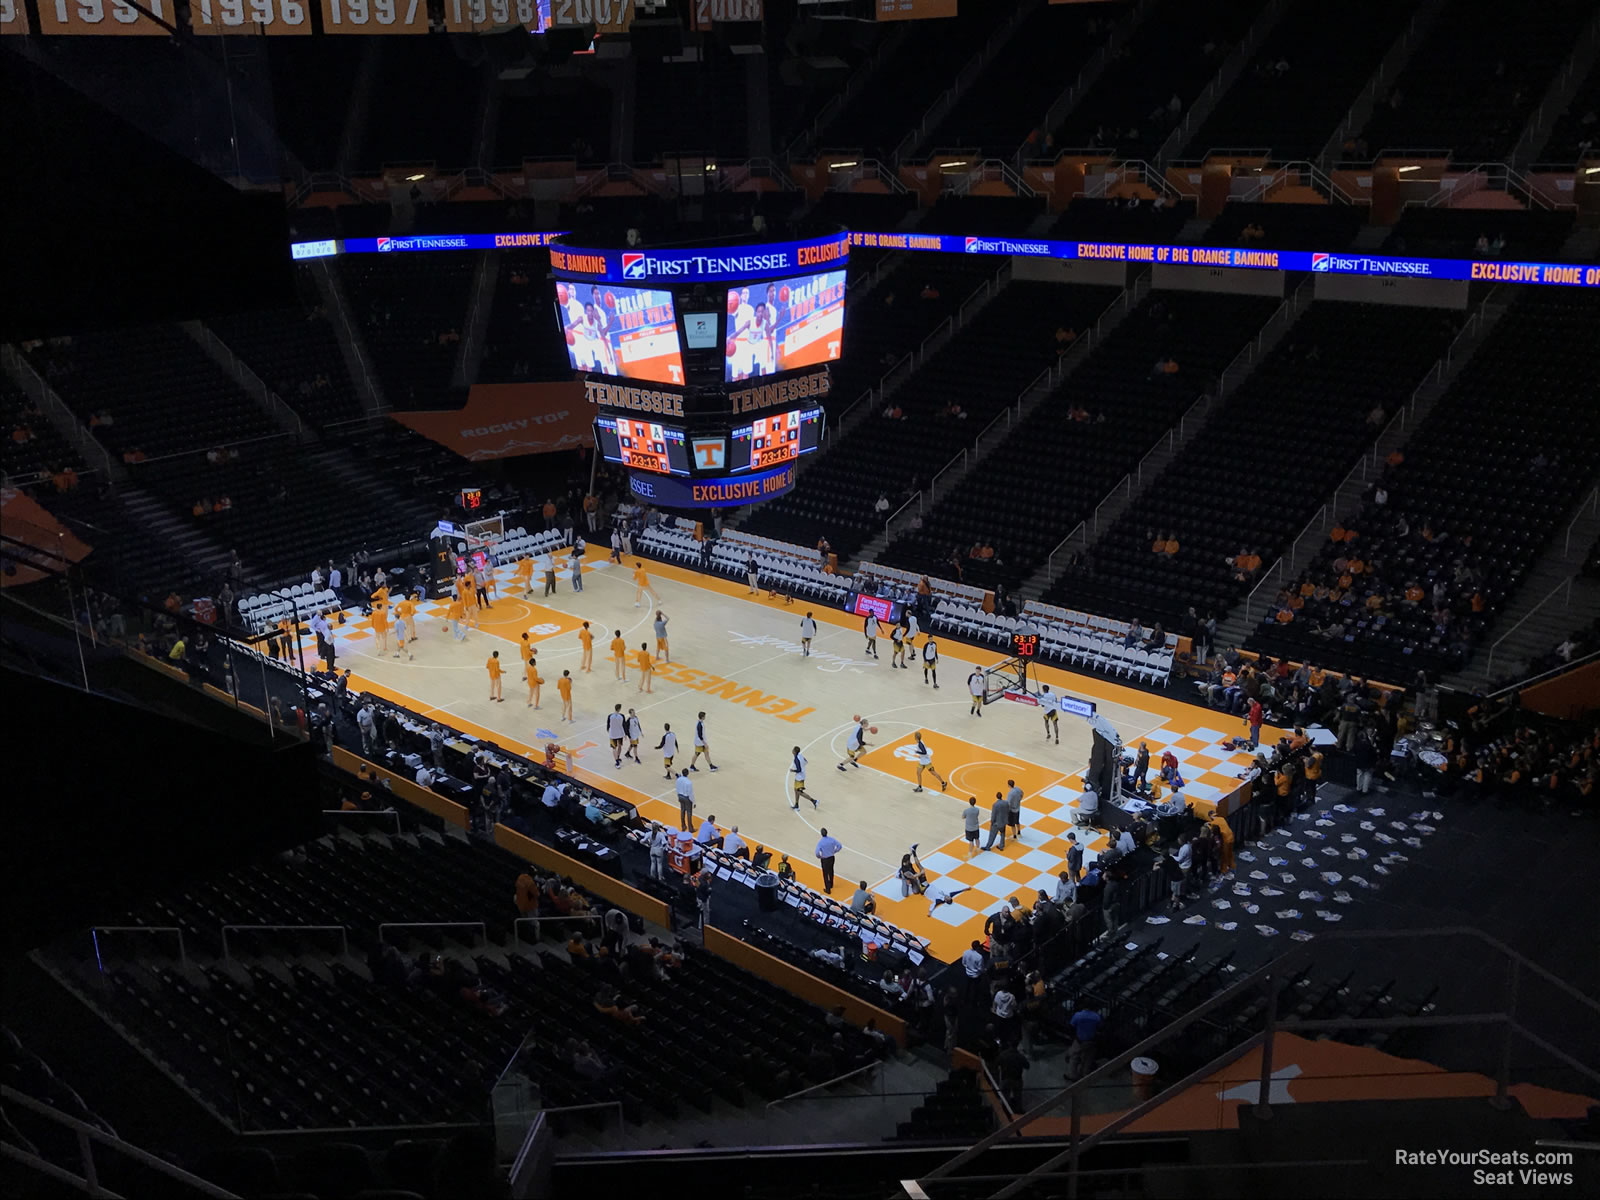 section 301, row 7 seat view  - thompson-boling arena